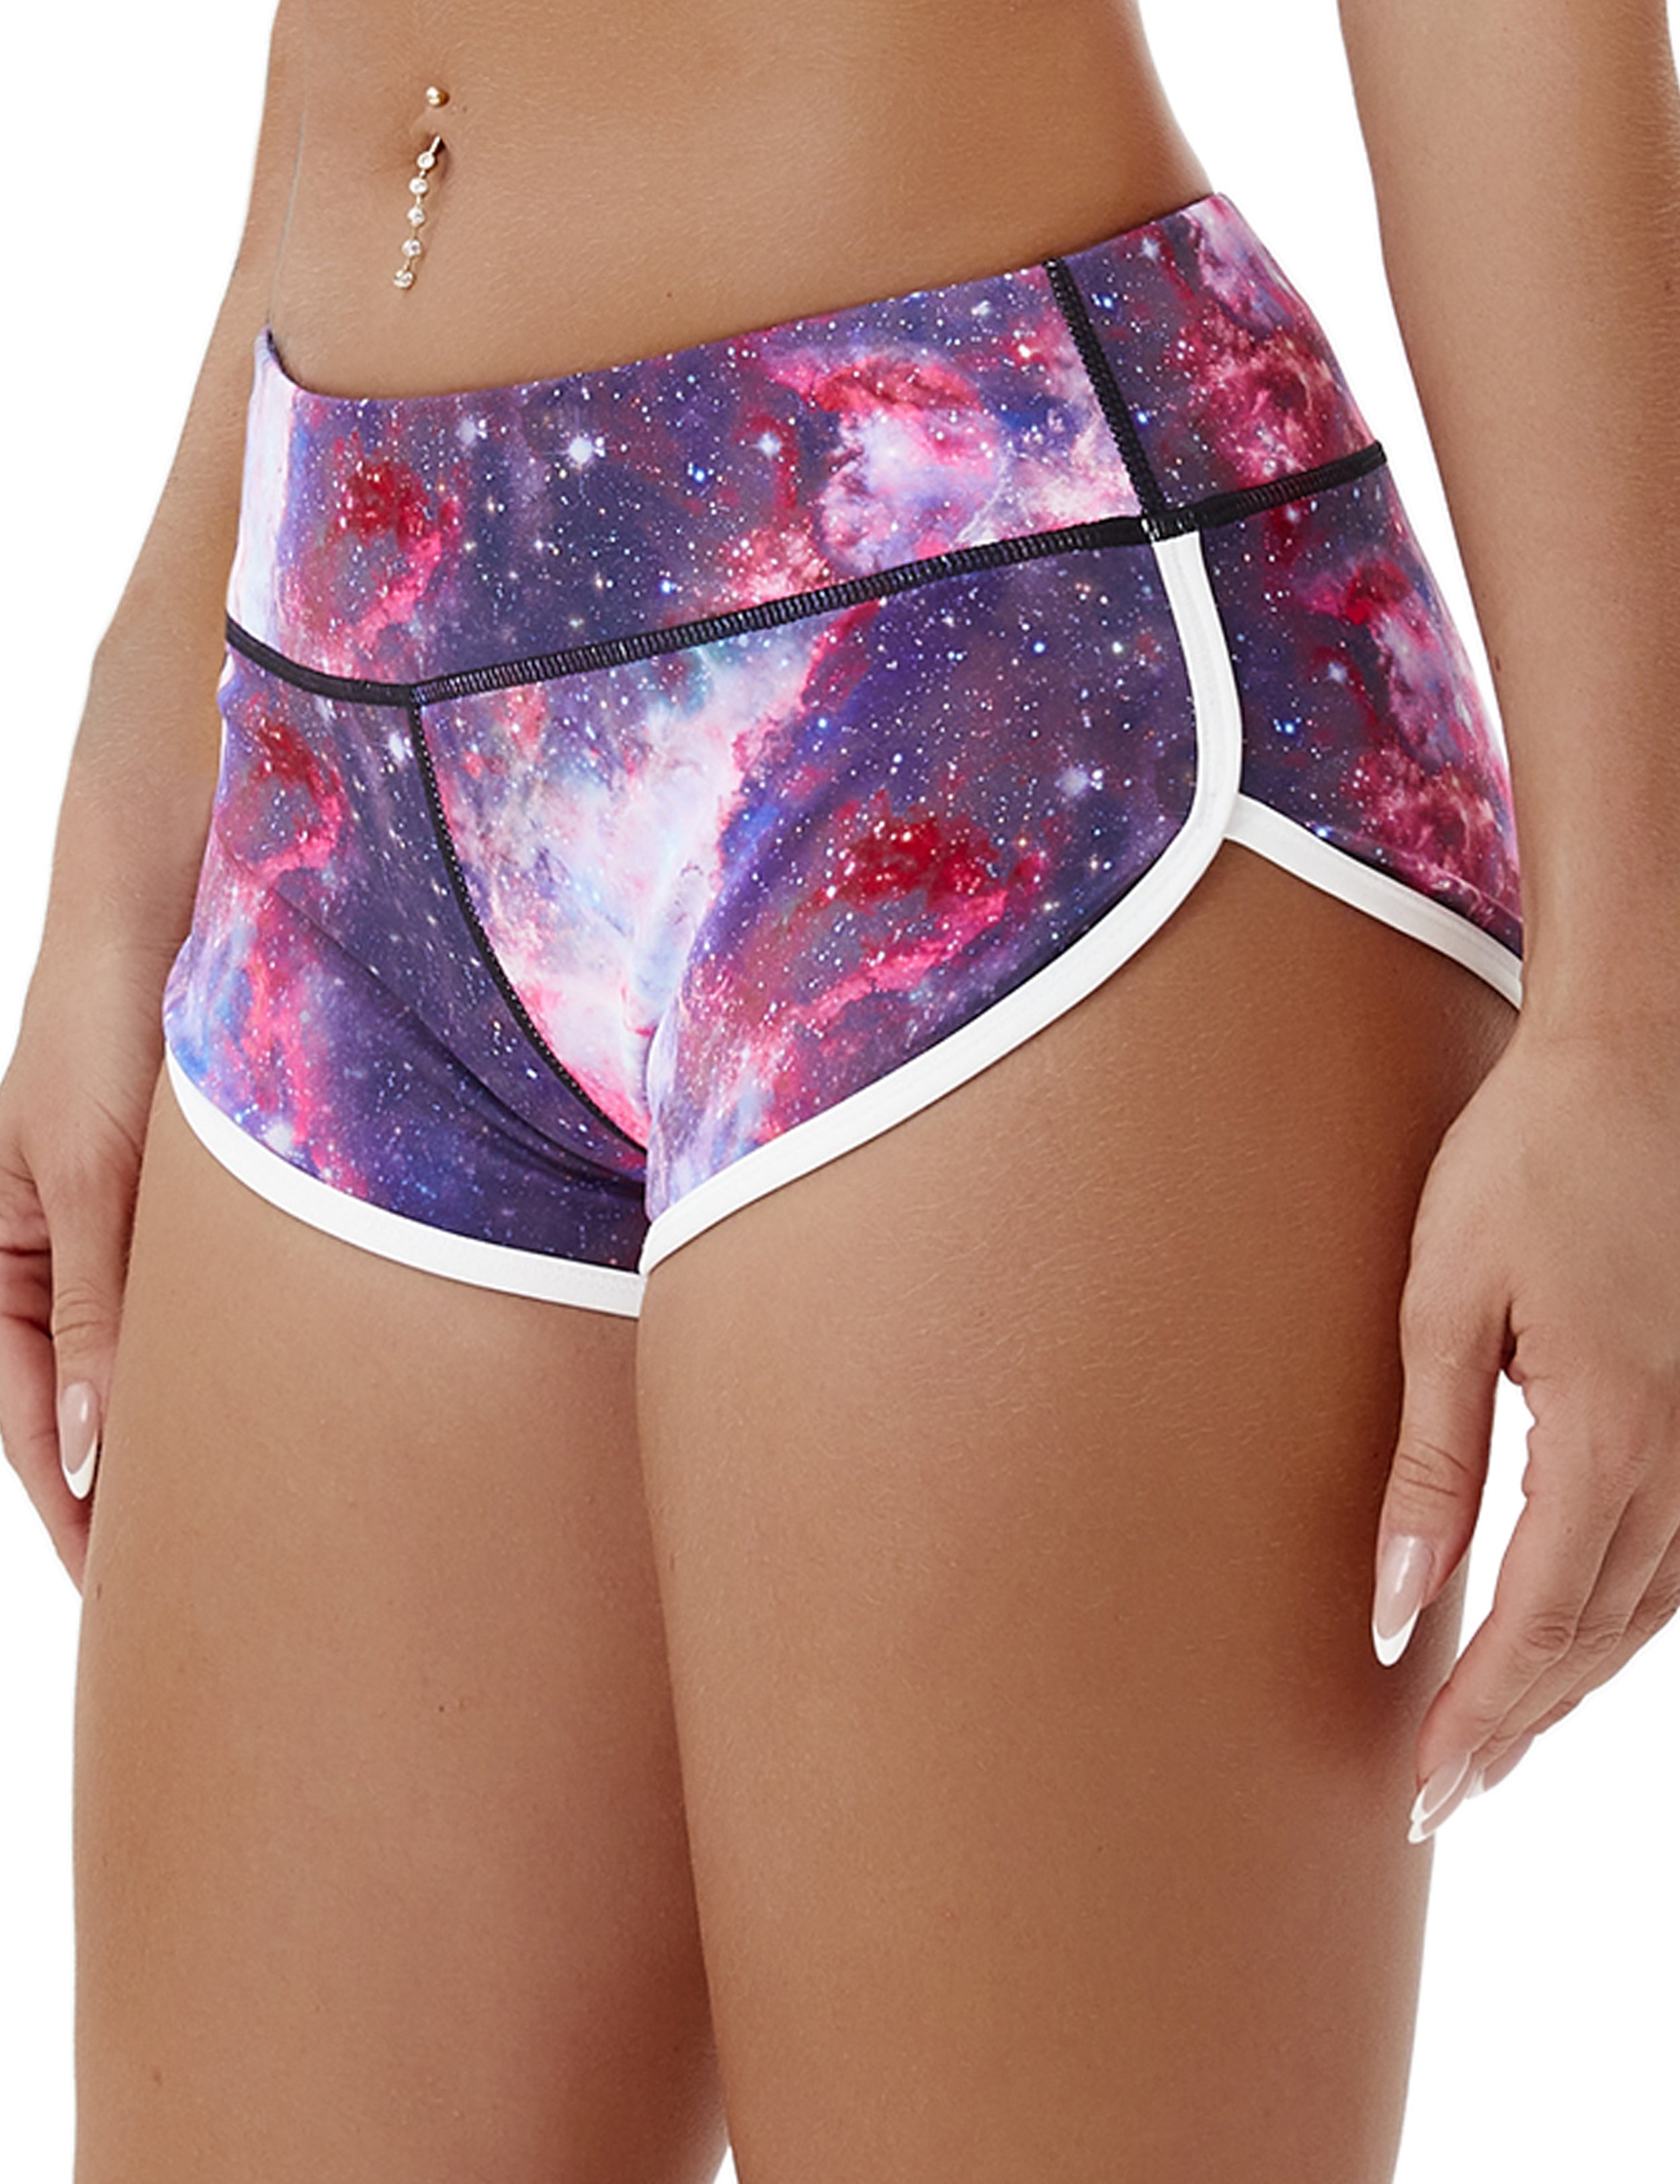 Printed Booty Jogging Shorts galaxy Sleek, soft, smooth and totally comfortable: our newest sexy style is here. Softest-ever fabric High elasticity High density 4-way stretch Fabric doesn't attract lint easily No see-through Moisture-wicking Machine wash 78% Polyester, 22% Spandex